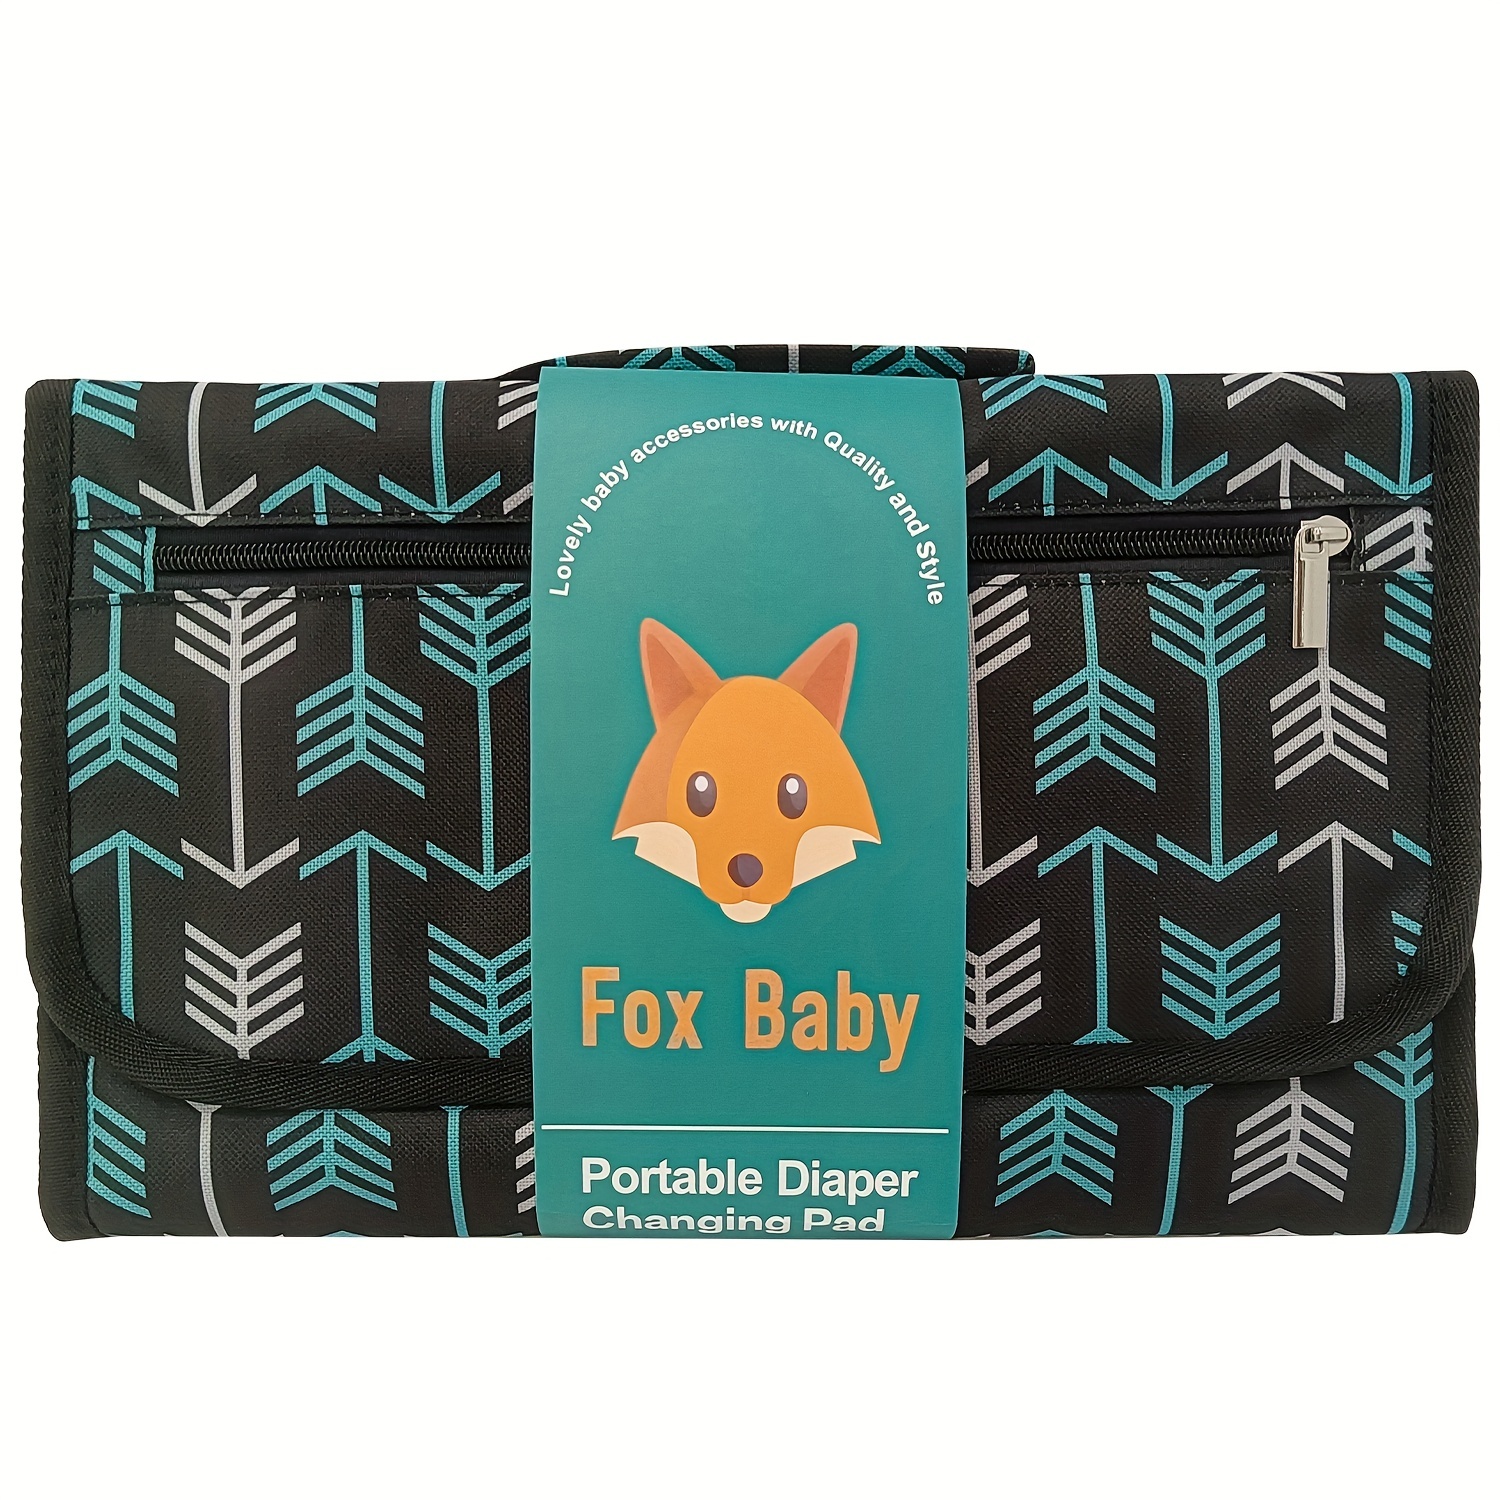 Baby Changing Pad - Portable Diaper Changing Table Pad